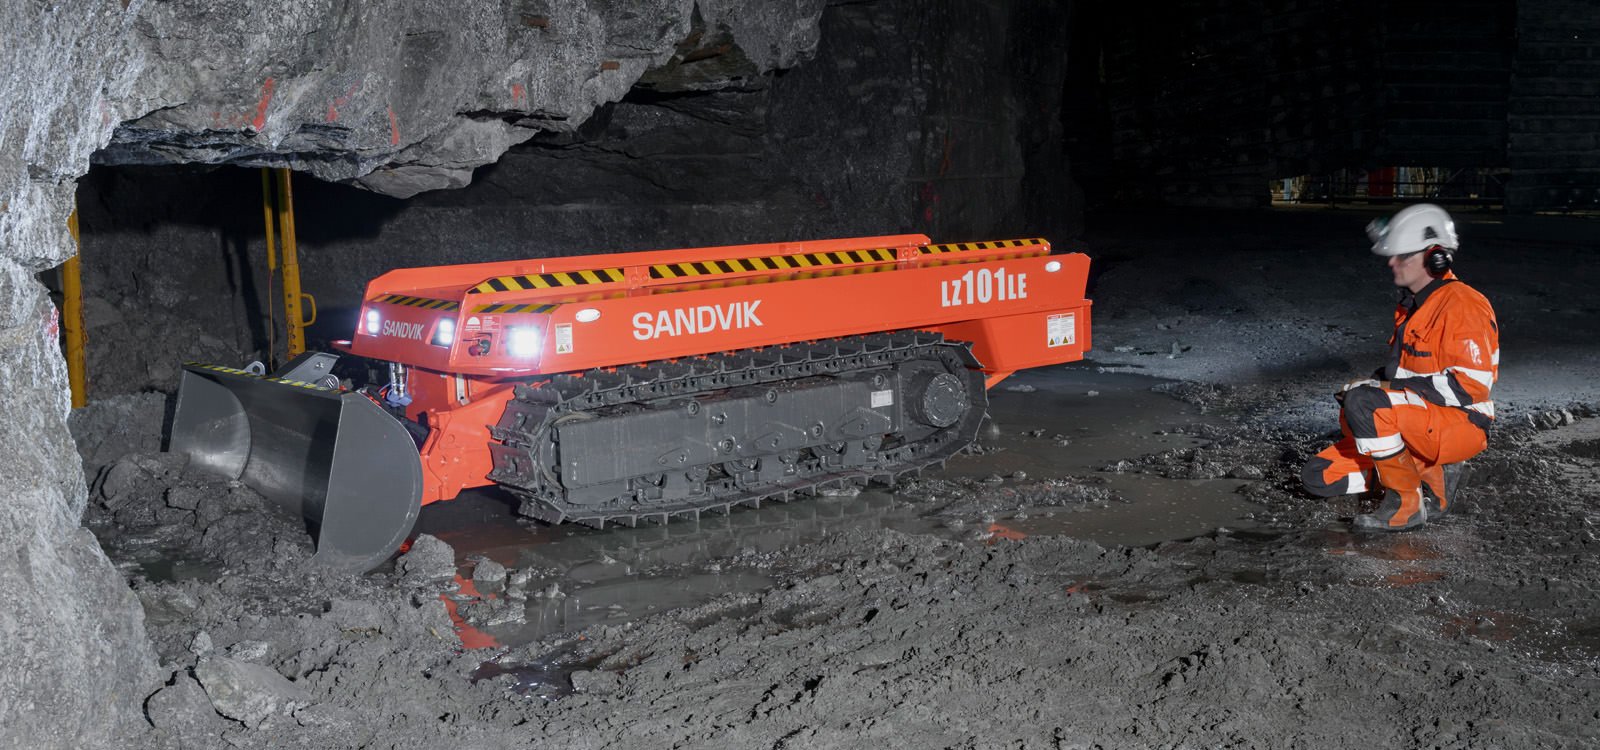 <p>Sandvik LZ101LE d is remotely operated, enabling operators to work at a safe distance away from hazardous, unsupported areas of the mine.</p>
